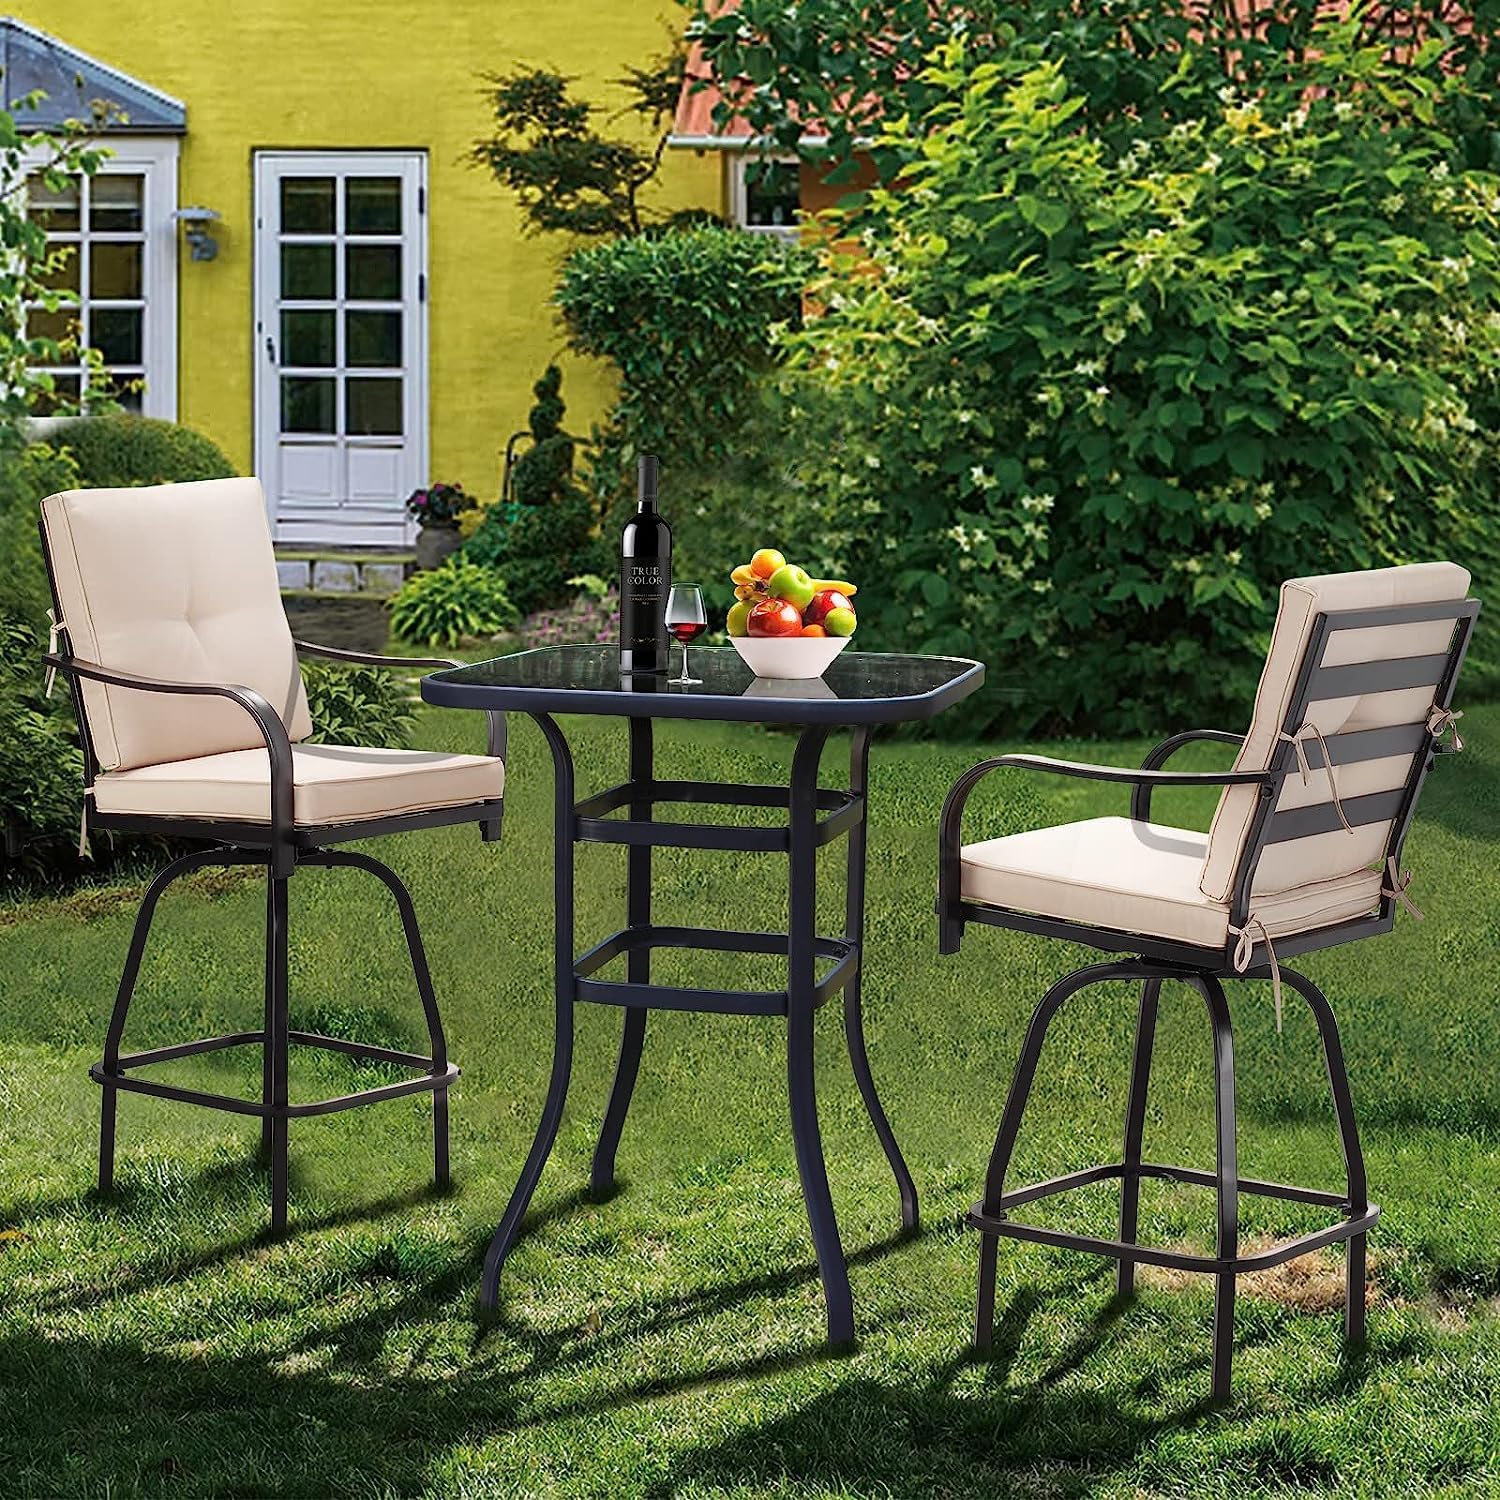 traditional outdoor swivel bar stools clearance price cheap garden seating ideas for outdoor dining space patio barstools with armrests and removable tie on cushions beige